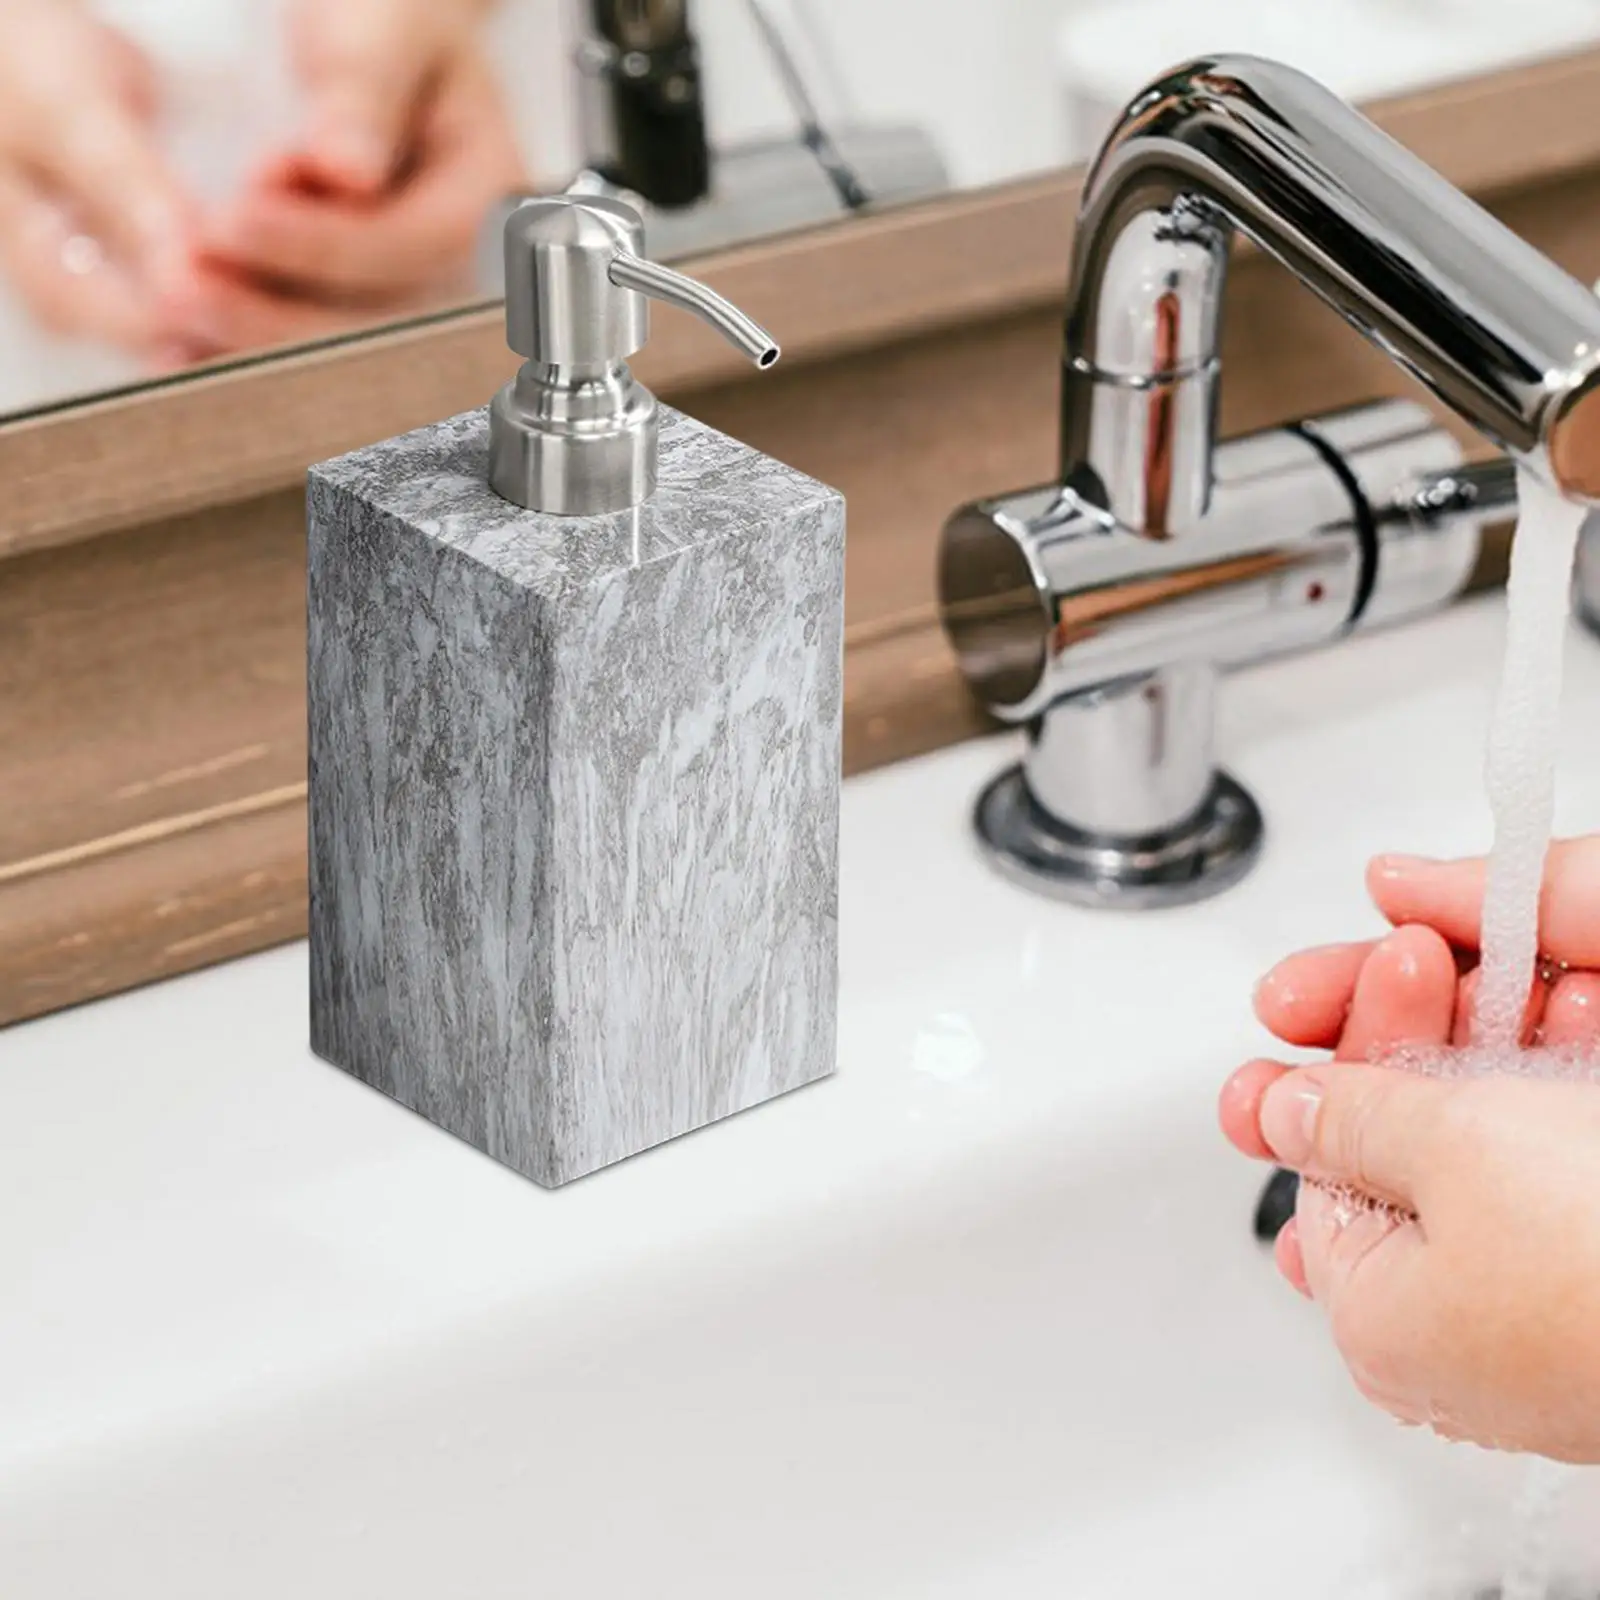 Pump Soap Container 500ml Durable Leakproof Salon Dispenser Resin Marble Texture Manual Soap Dispenser for Hotel Countertop Home